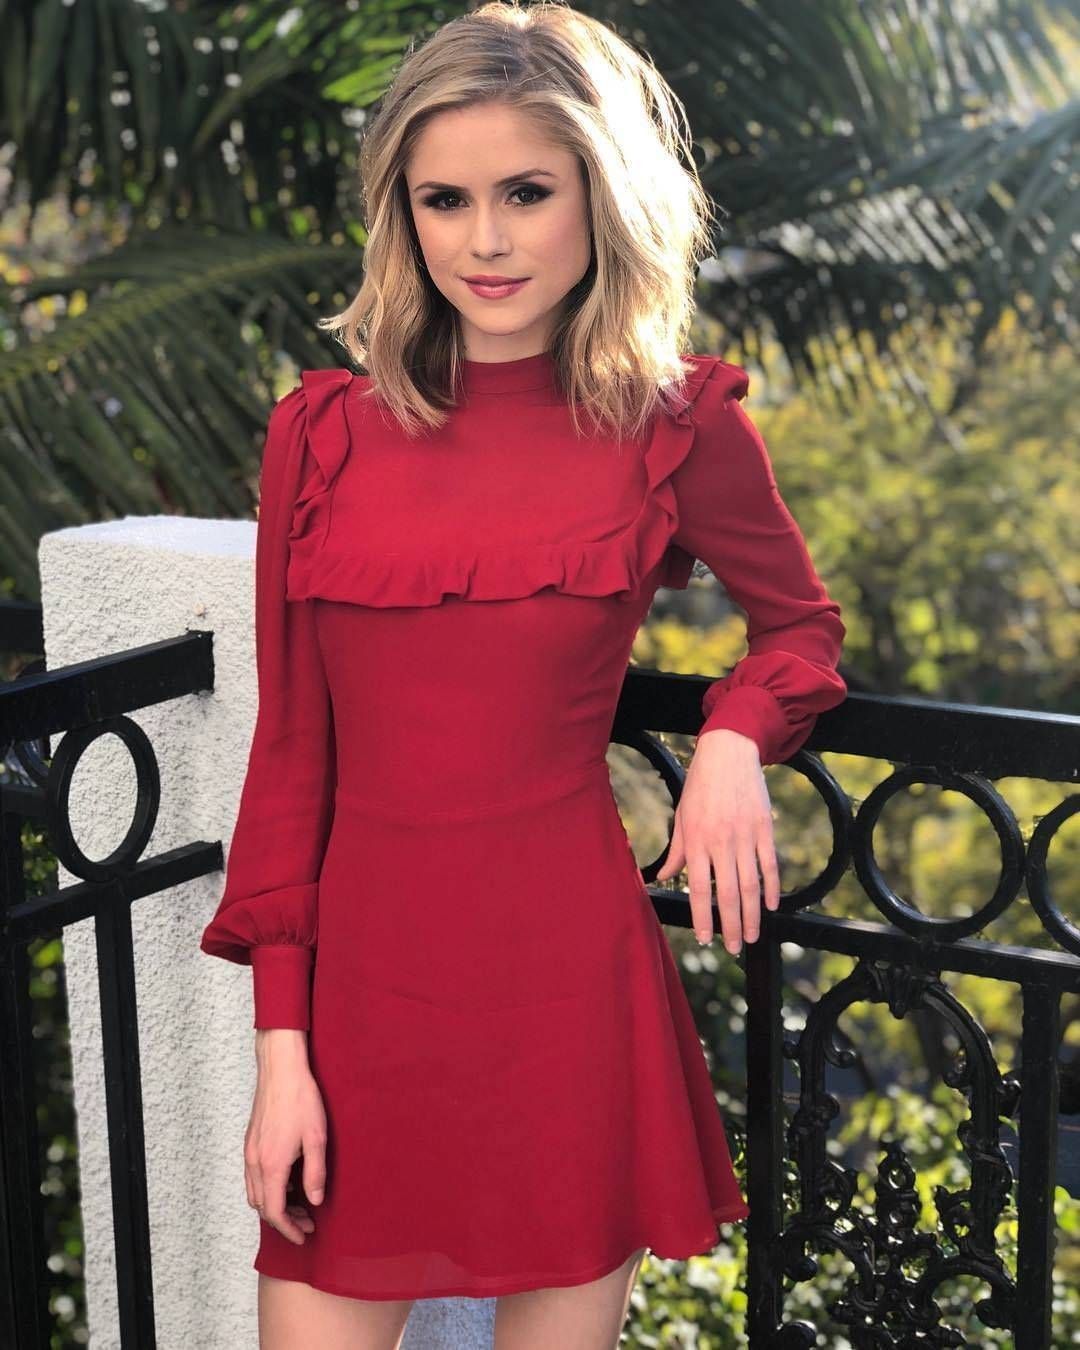 Face of Erin Moriarty 2020 Wallpapers